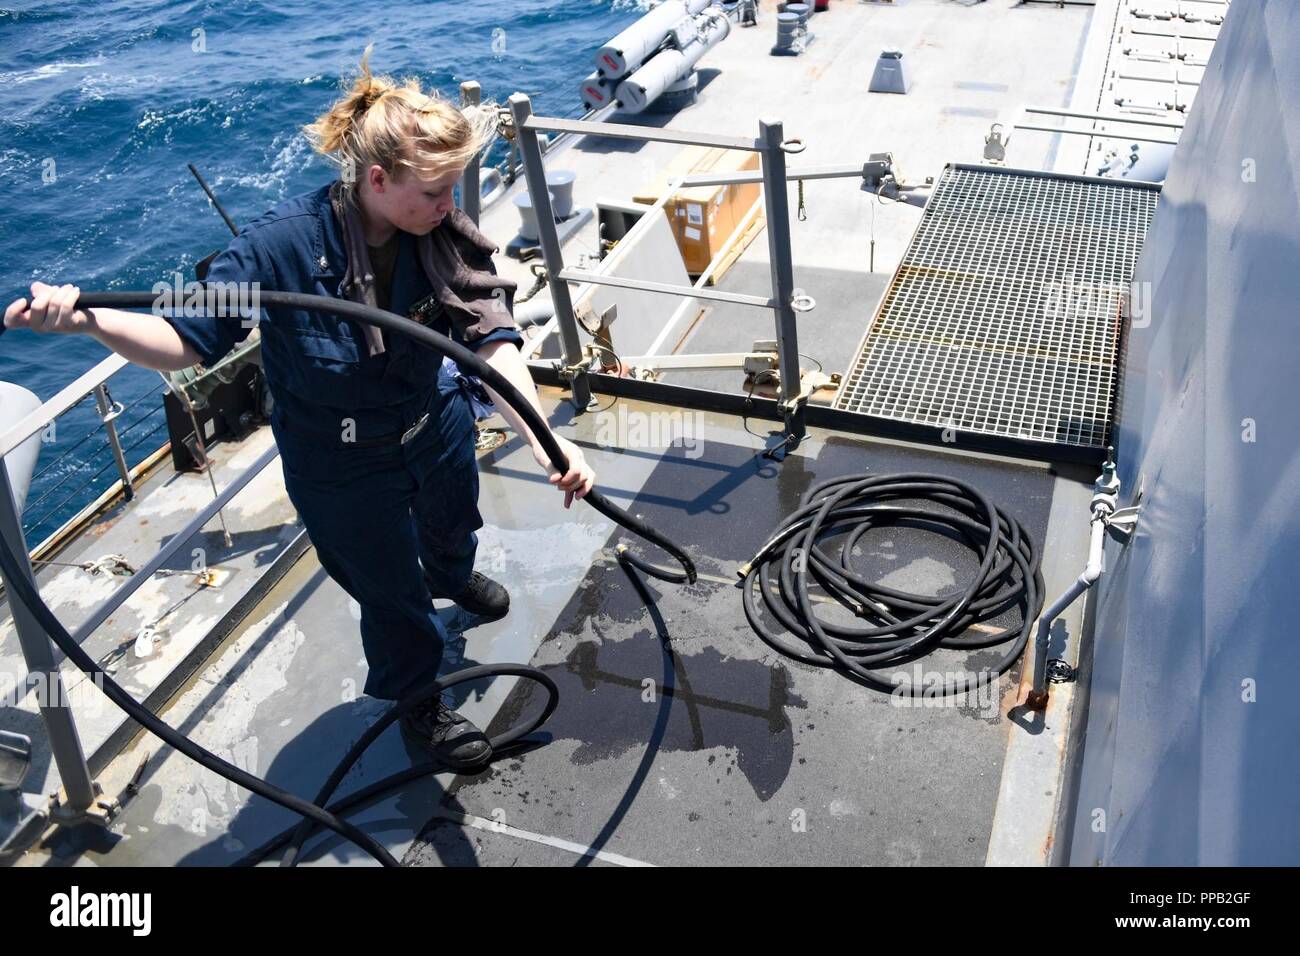 ARABIAN GULF (Aug. 13, 2018) Gas Turbine Systems Technician (Mechanical) 3rd Class Jillian Storey coils a hose after conducting a 72-hour gas turbine engine intake cleaning on the Arleigh-burke class missile-destroyer USS The Sullivans (DDG 68). The Sullivans is deployed to the U.S. 5th Fleet area of operations in support of naval operations to ensure maritime stability and security in the Central region, connecting the Mediterranean and the Pacific through the western Indian Ocean and three strategic choke points. Stock Photo